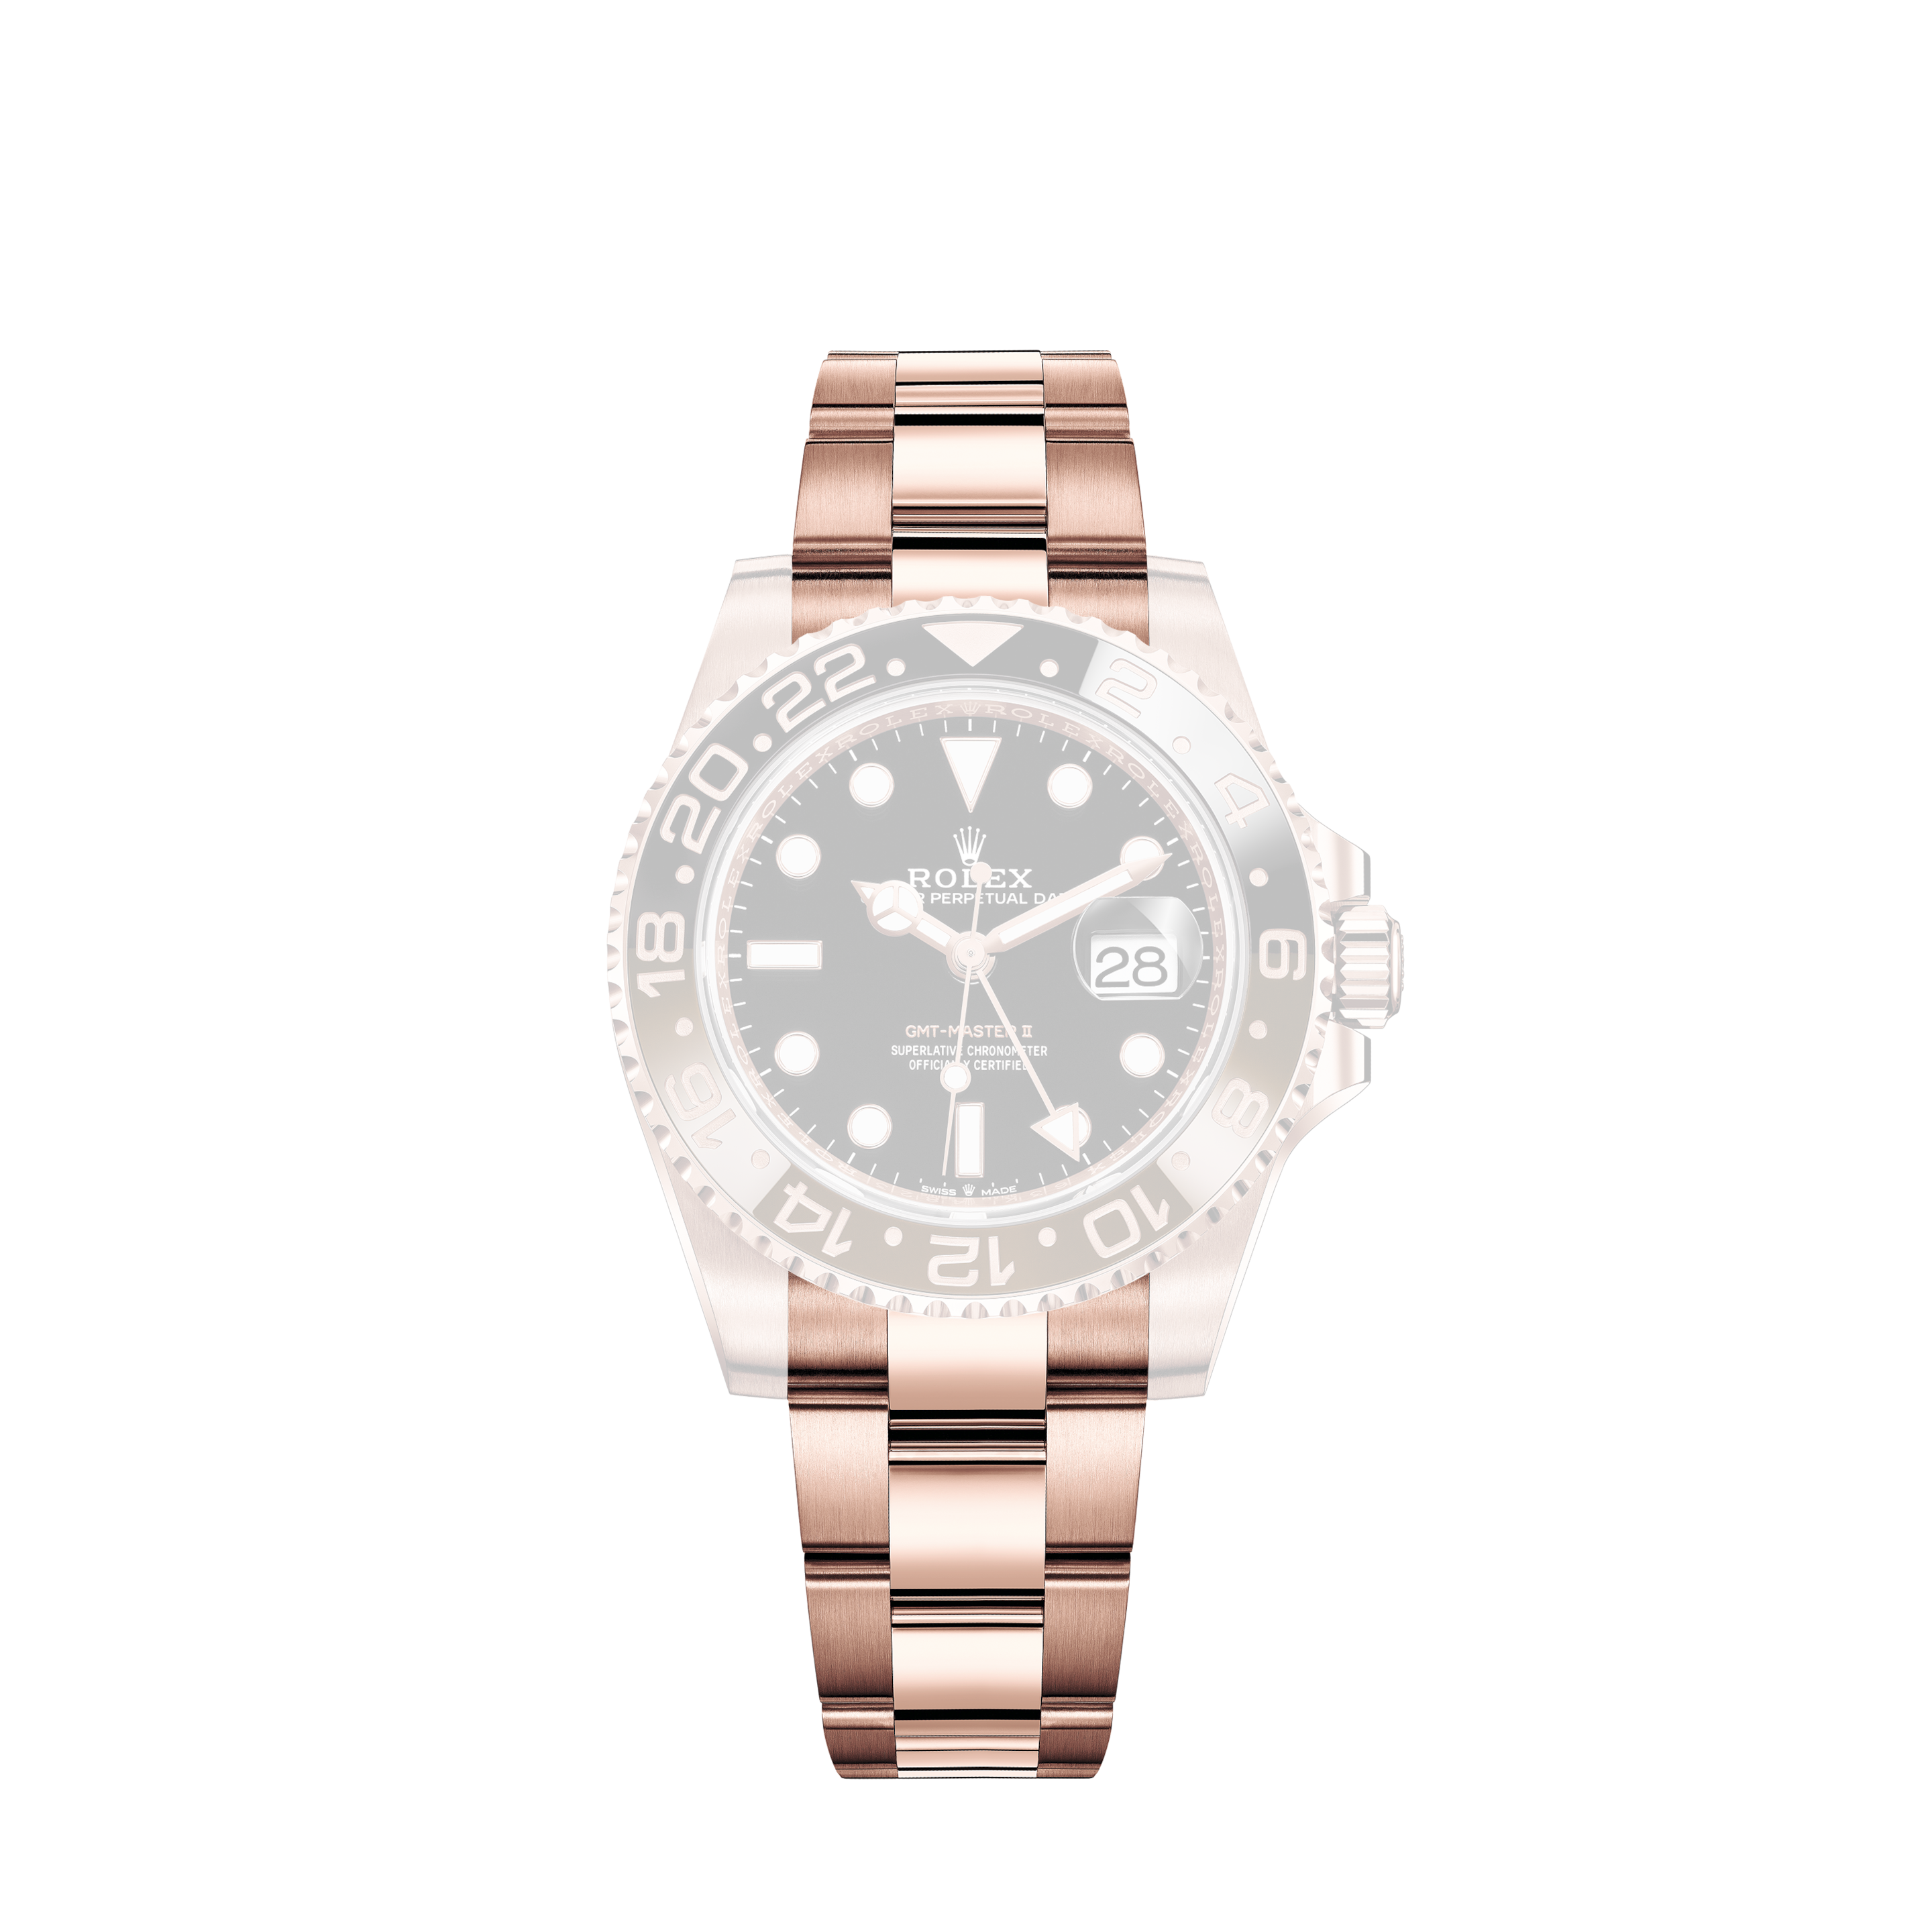 Rolex 36mm Datejust Champagne Diamond Face with Fluted Bezel Two Tone Jubilee Watch